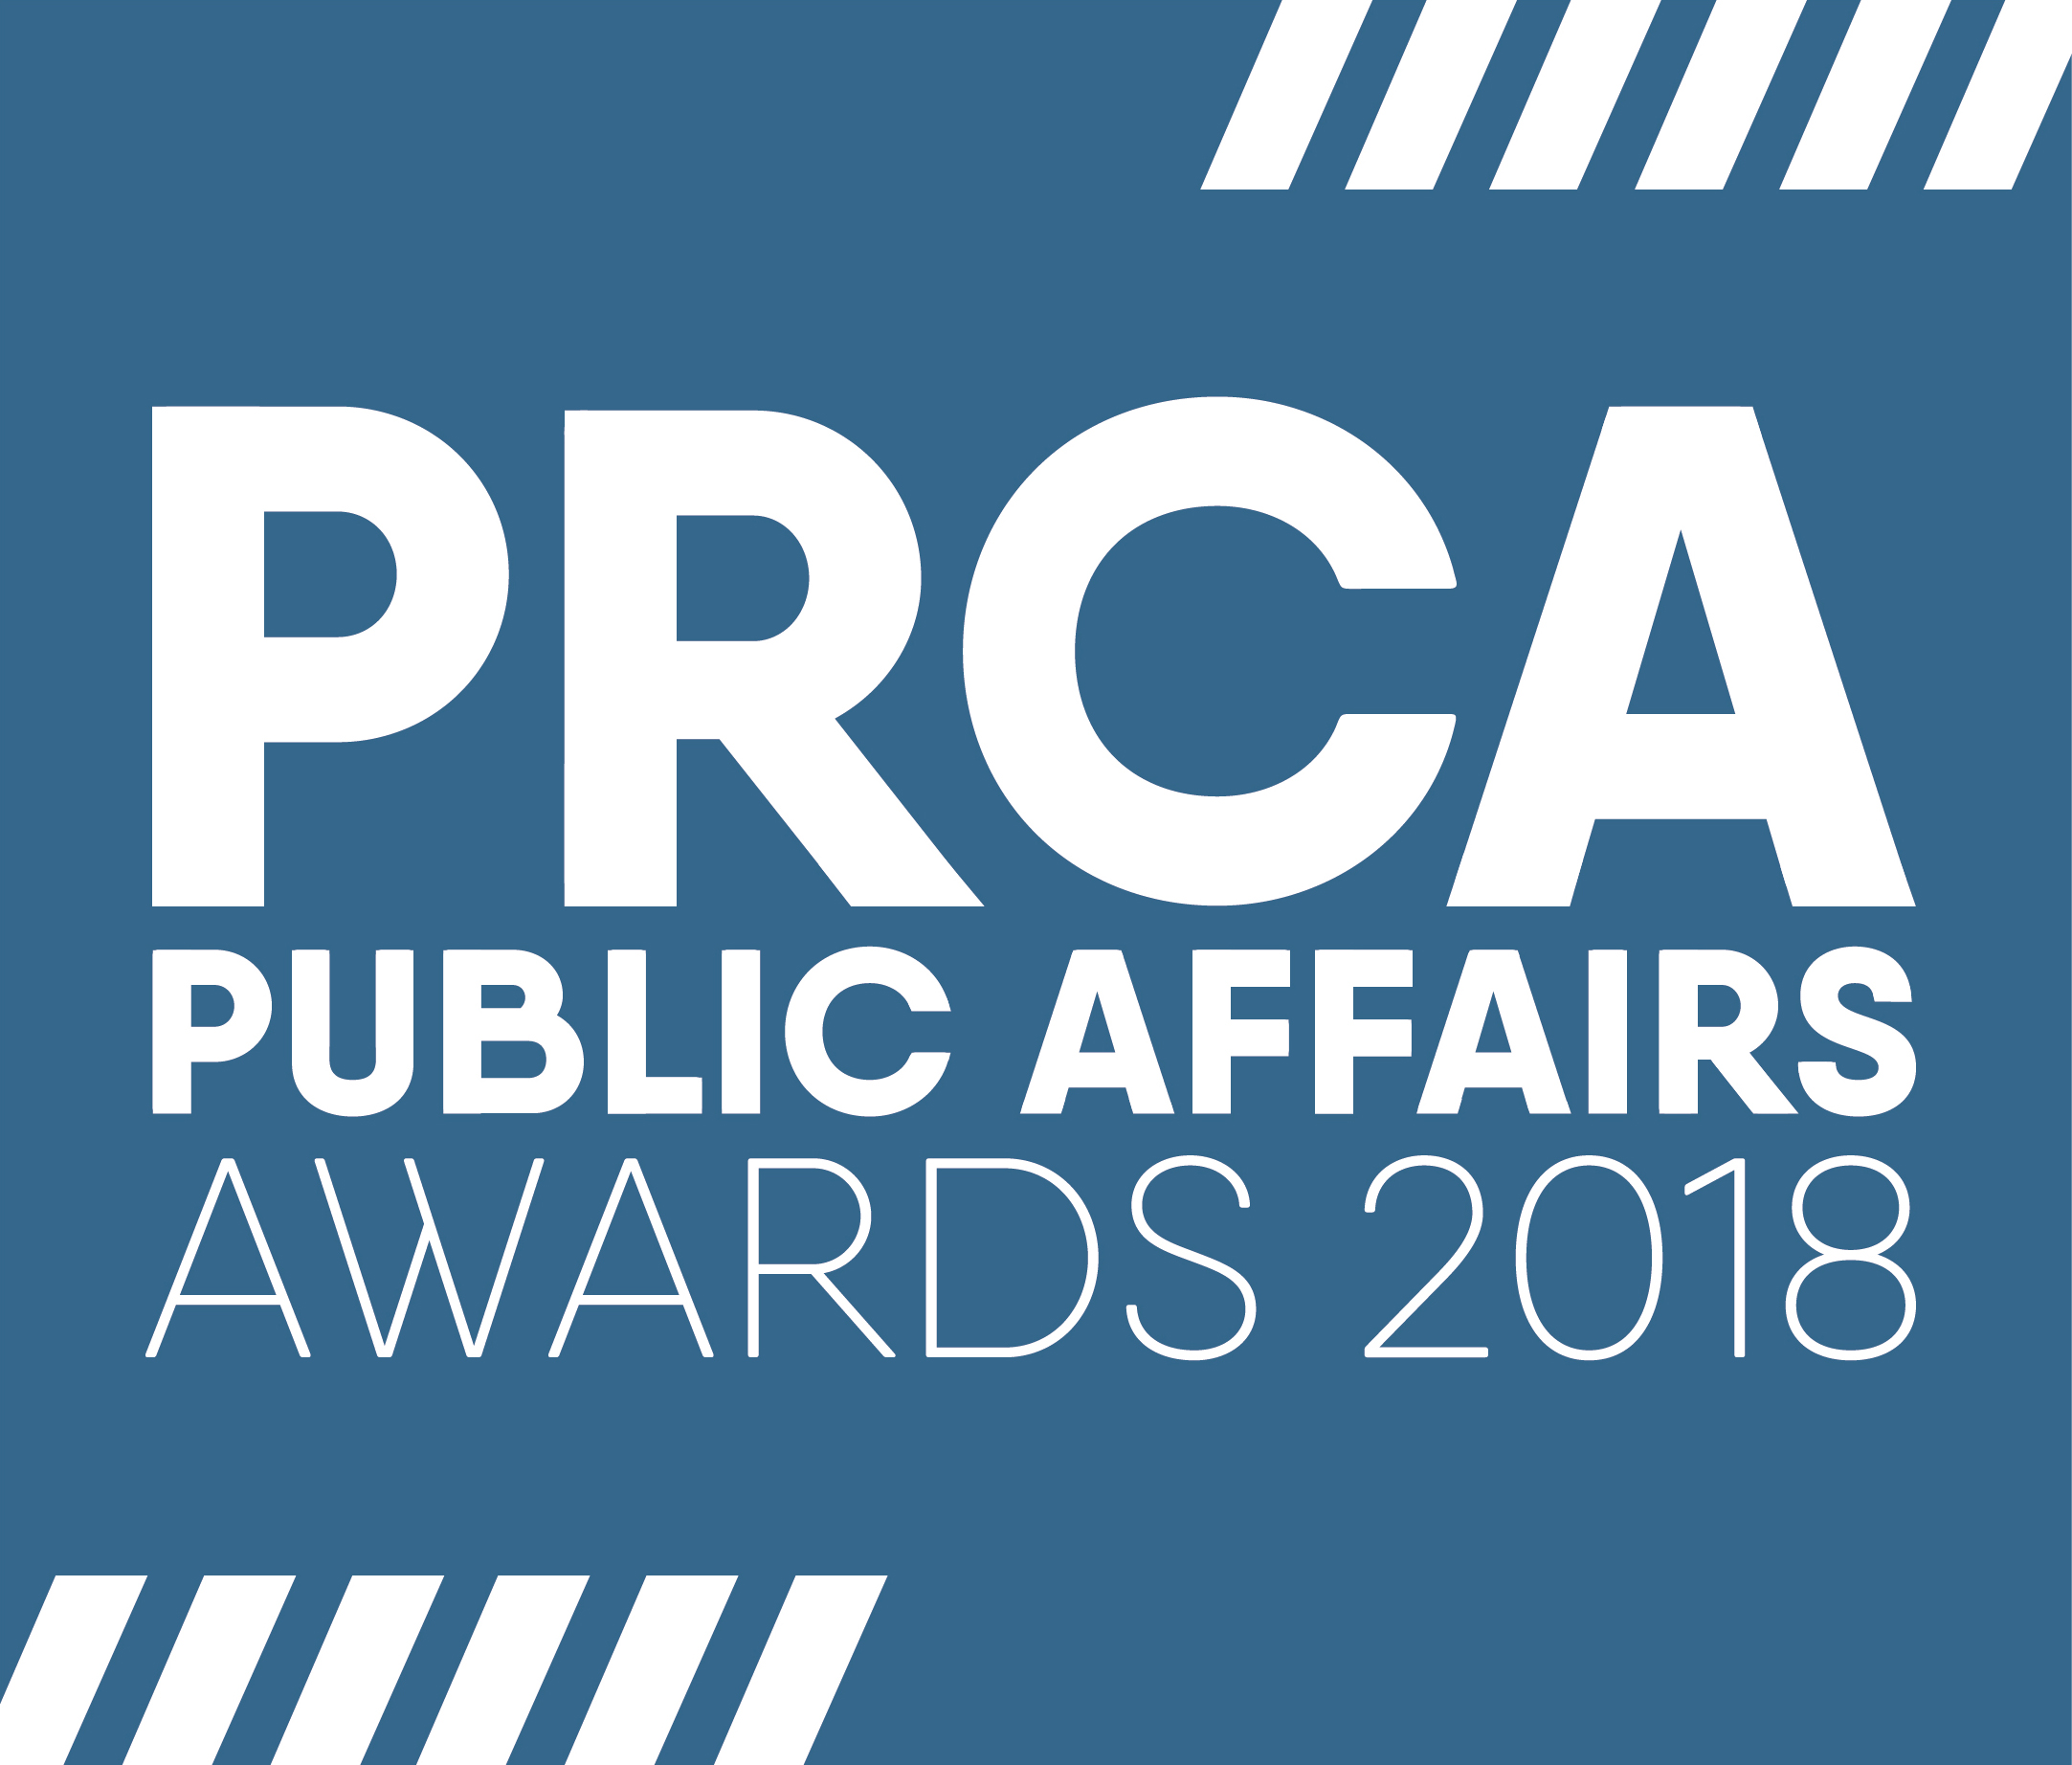 PRCA City and Finacial Awards 2018 PRCAPoliMonitor Public Affairs